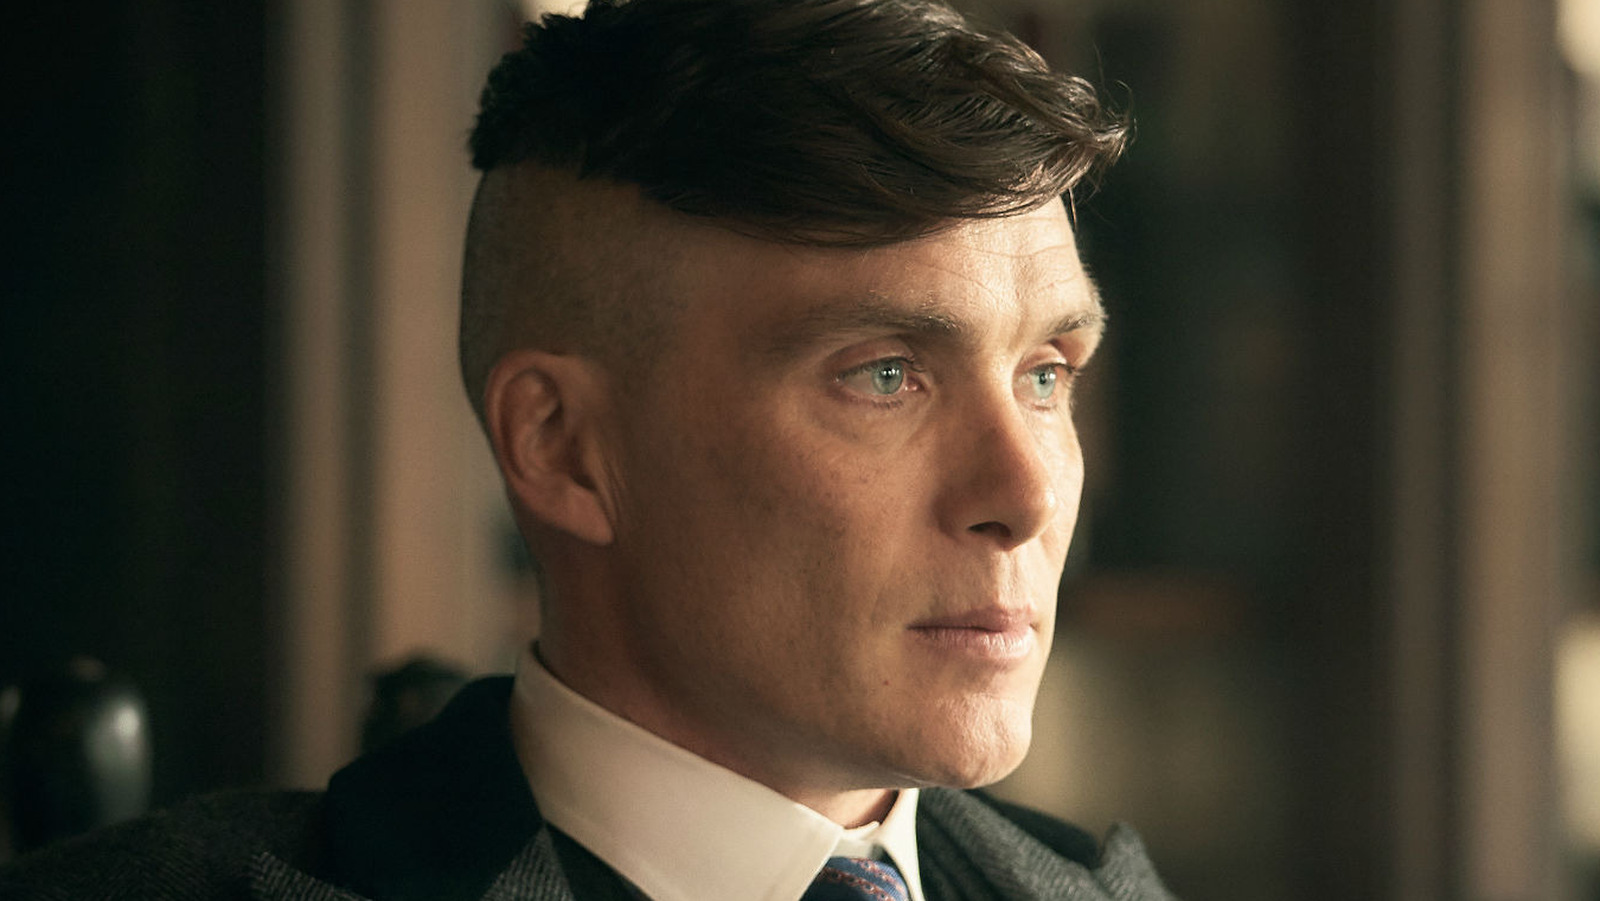 The man behind 'Peaky Blinders' and 'Taboo' is creating an epic